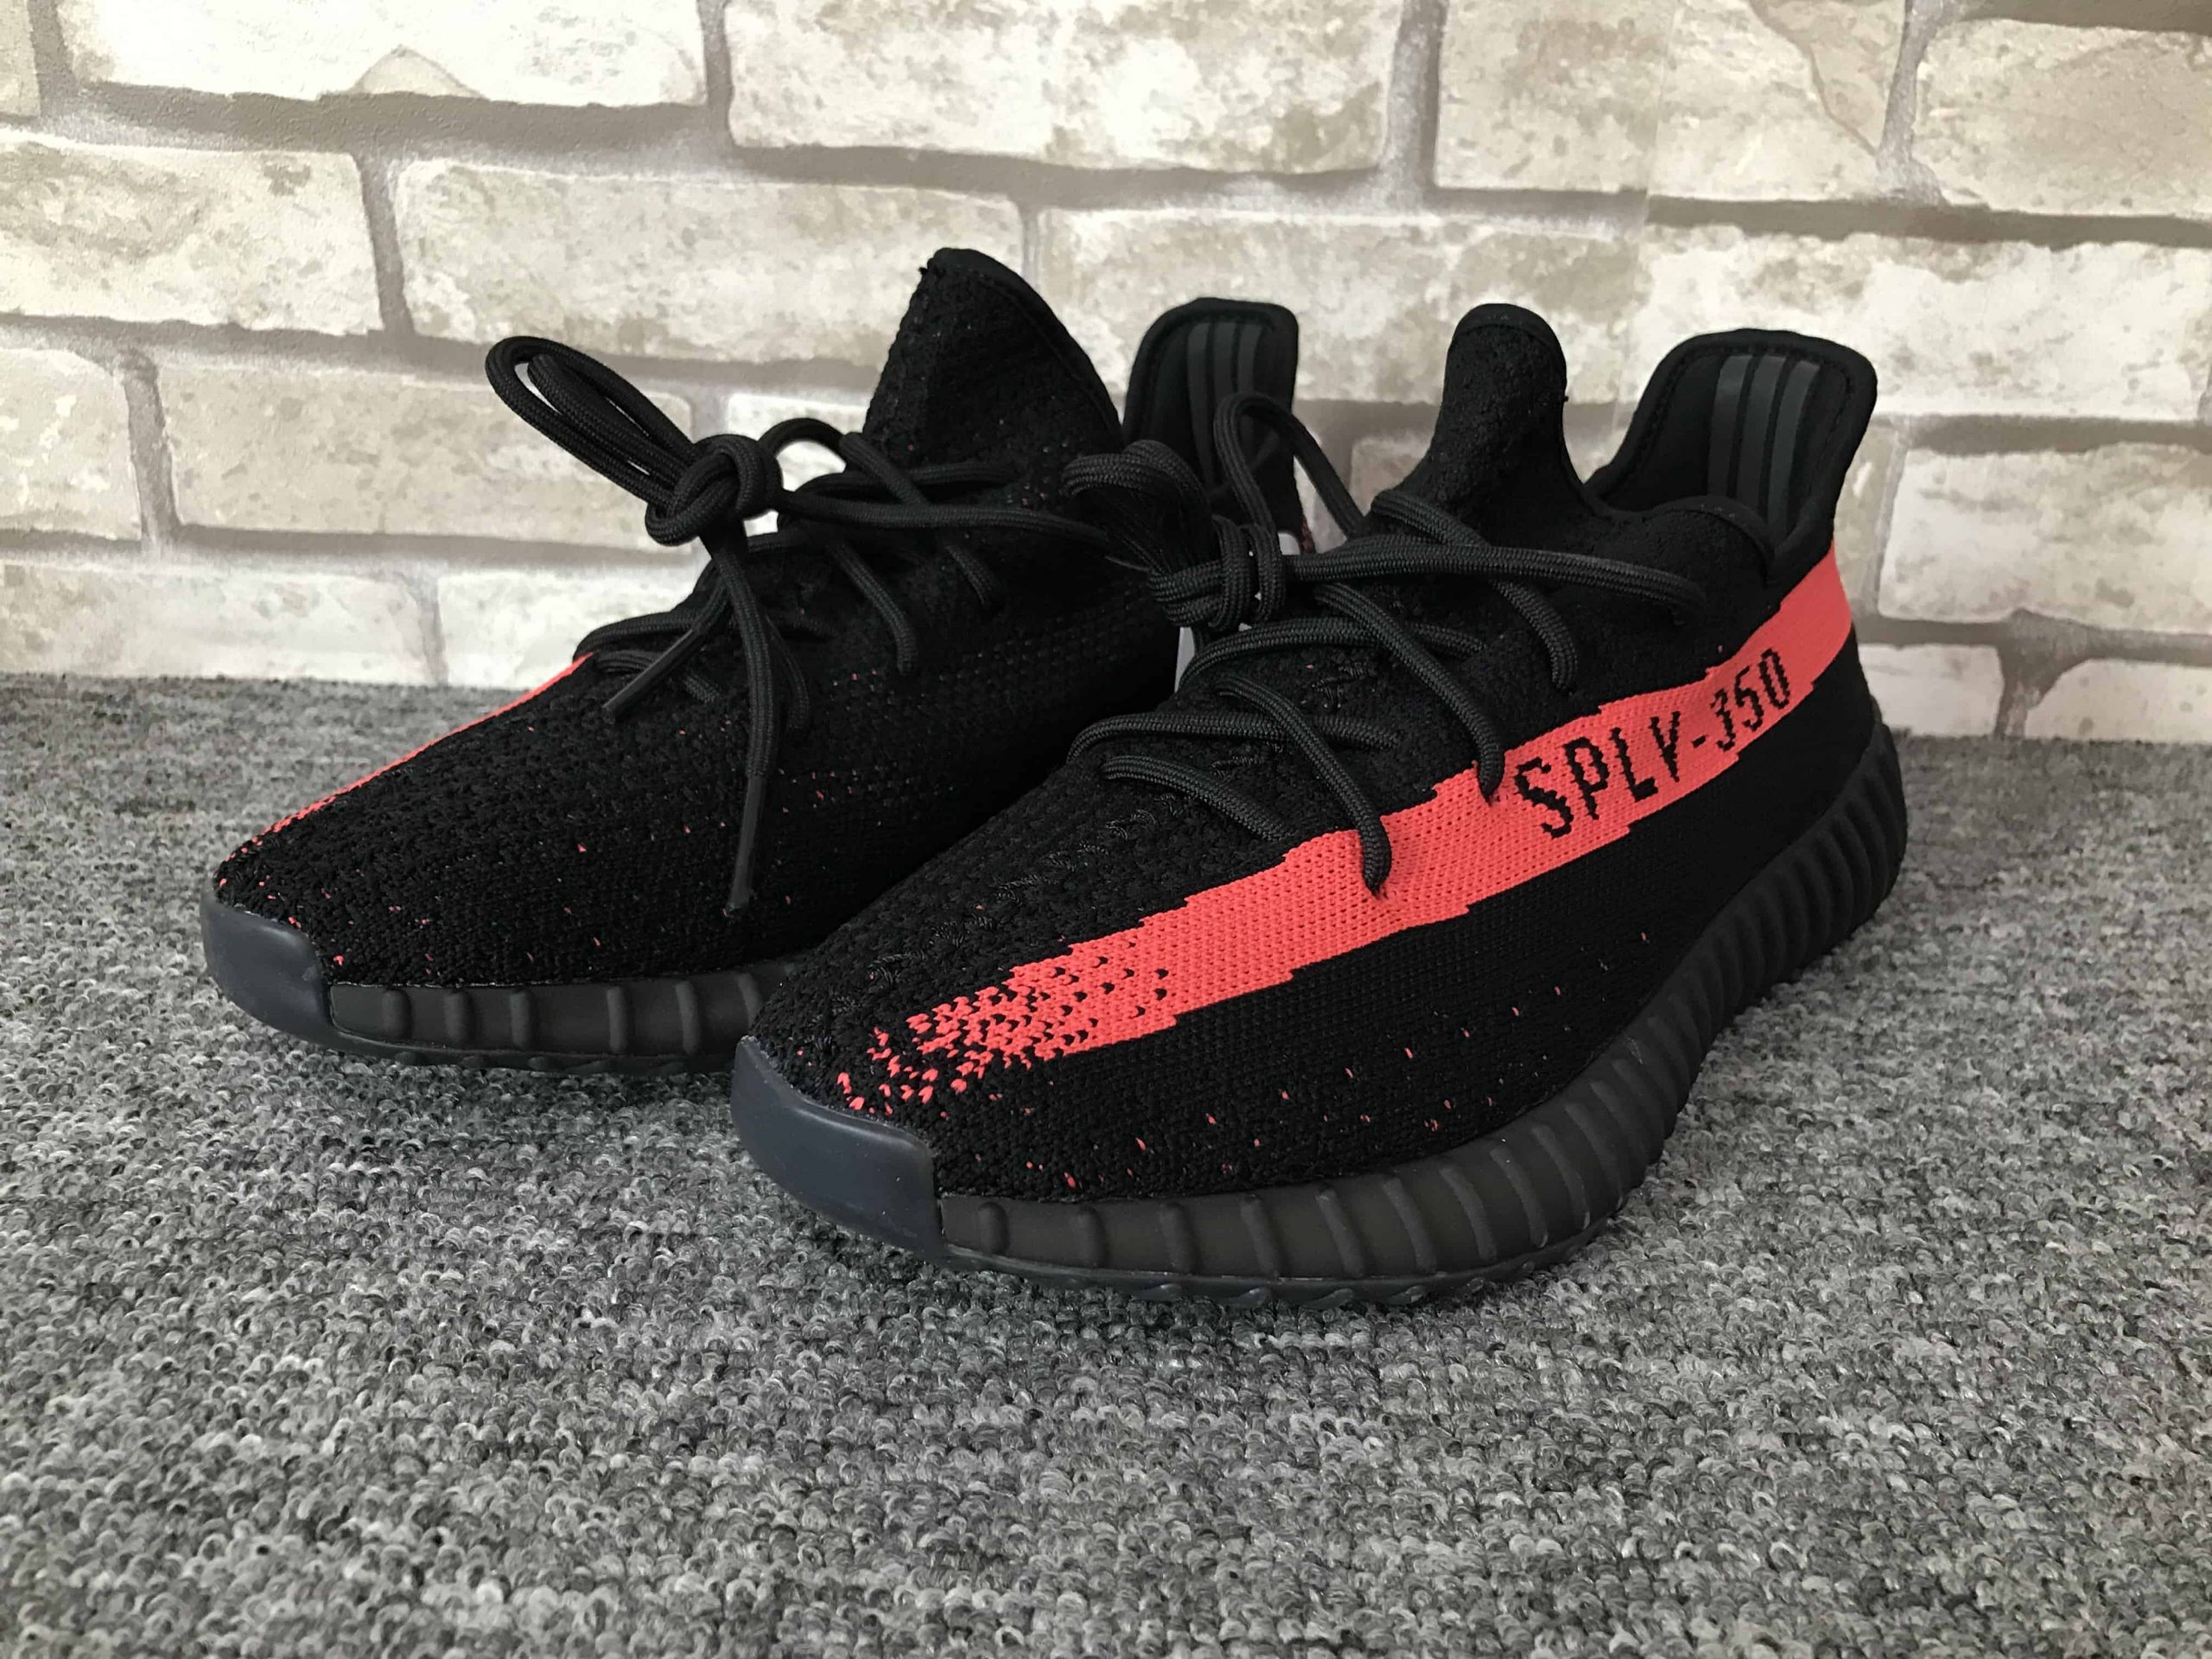 Adidas Yeezy 350 Boost V2 Black and — TrapXShop